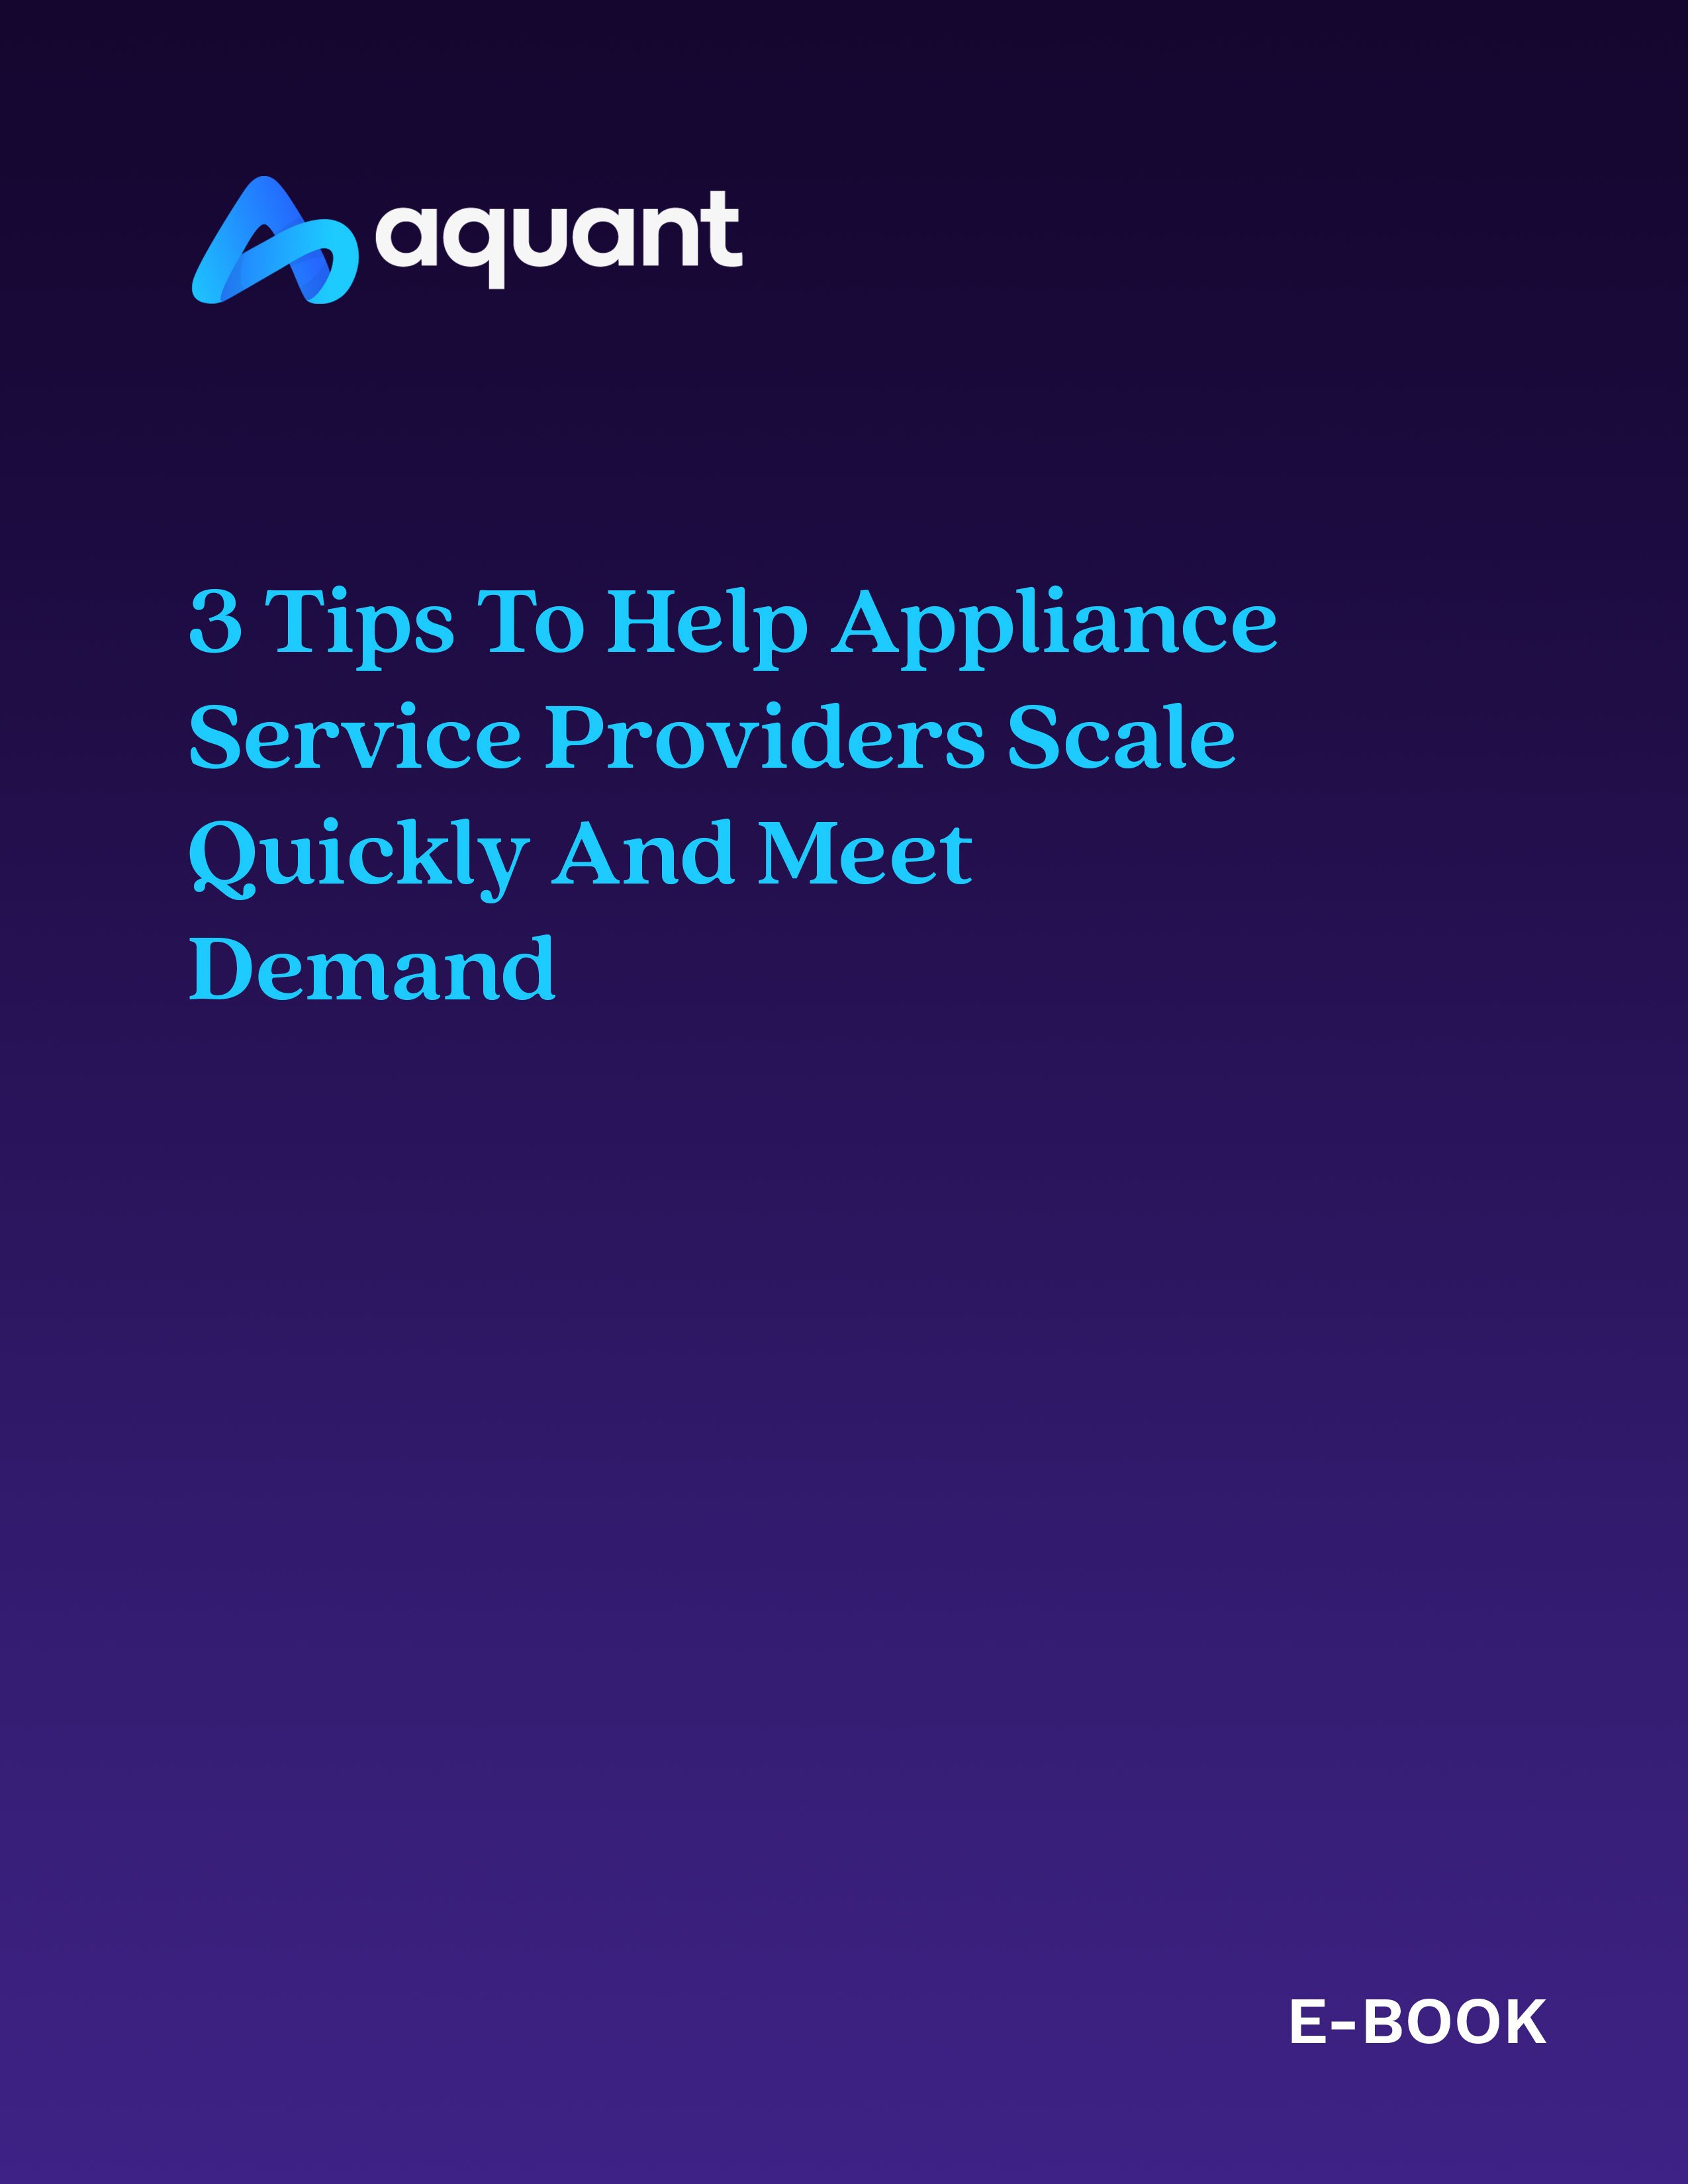 E-Books-_3-Tips-to-Help-Appliance-Service-Providers-Scale-Quickly-and-Meet-Demand-thumbnail